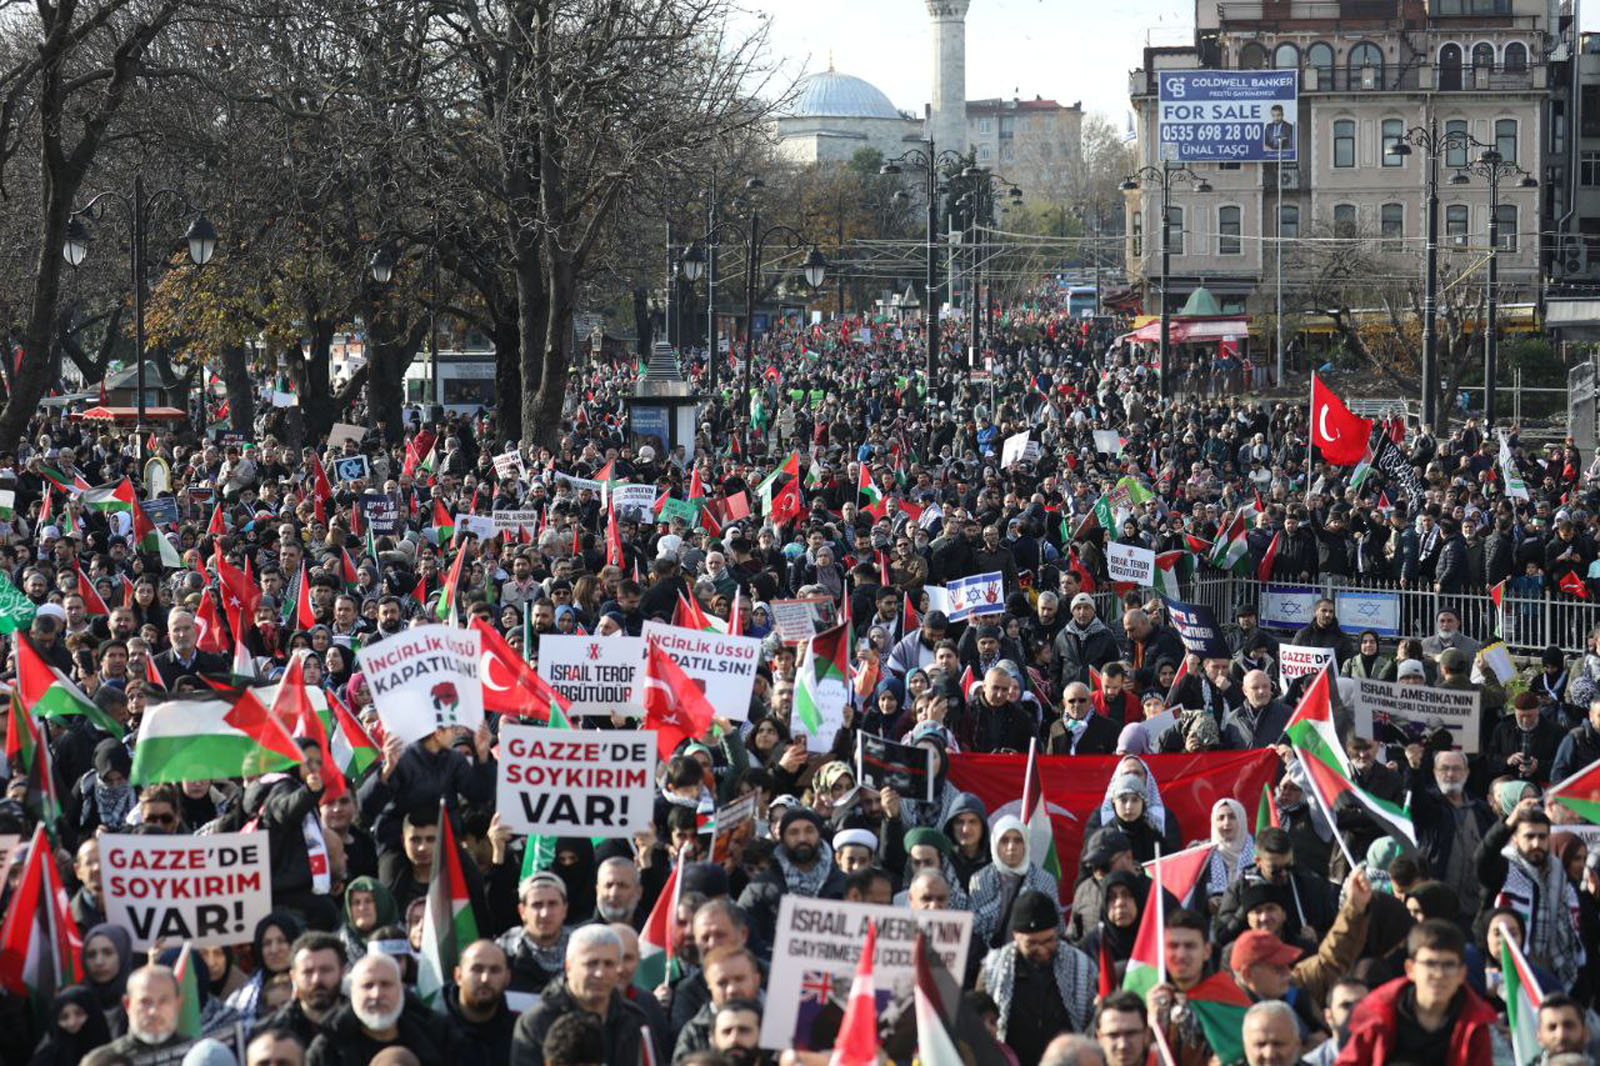 Tens of Thousands Marched for Palestine on Human Rights Day